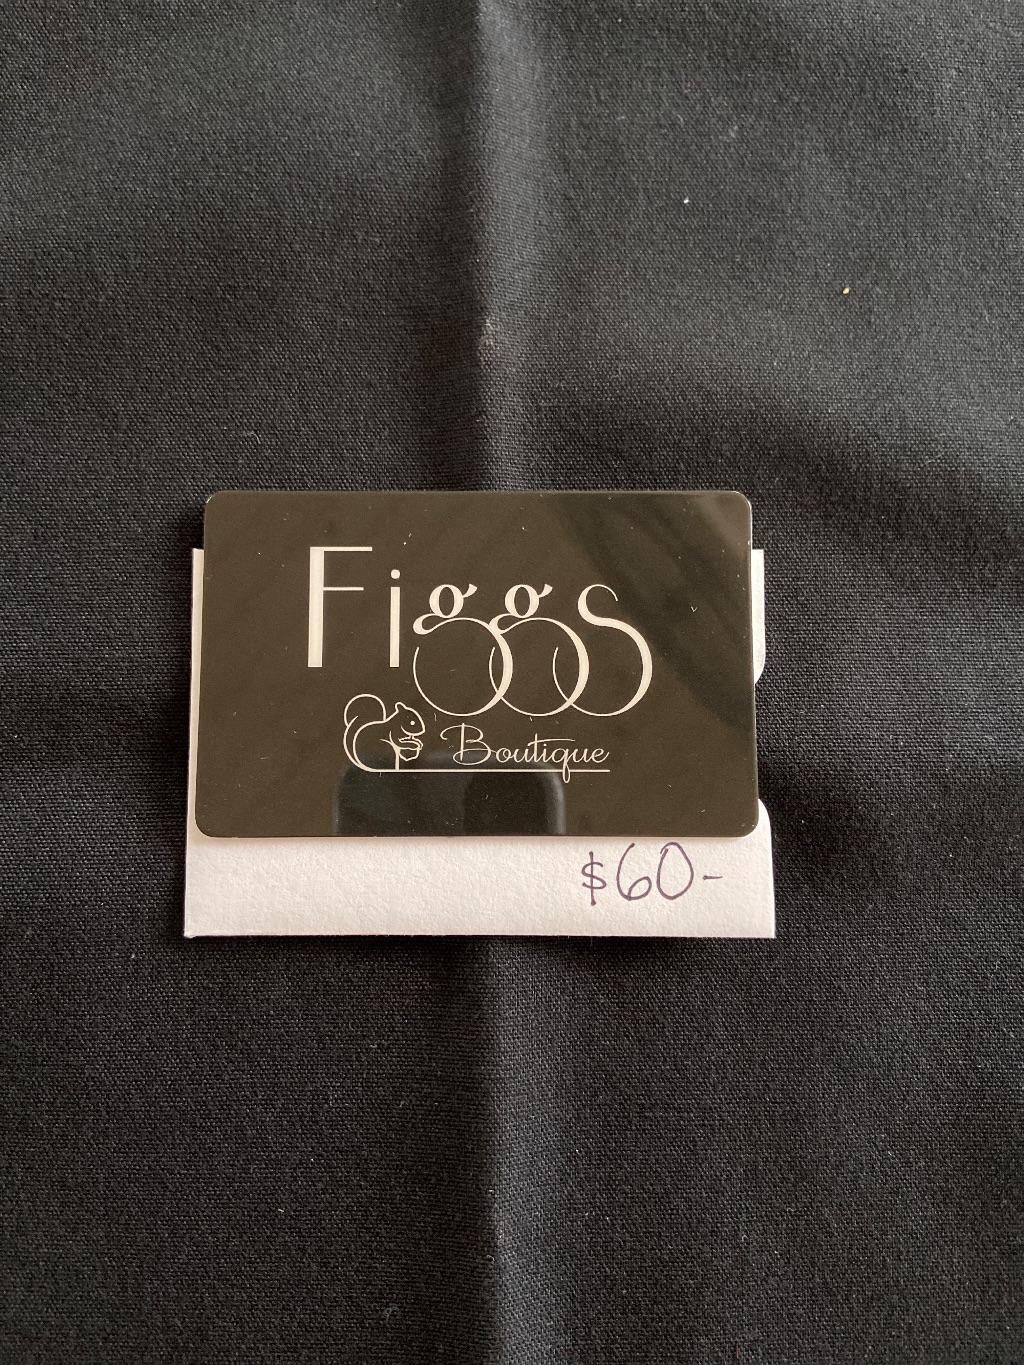 Figgs Boutique $60 Gift Card